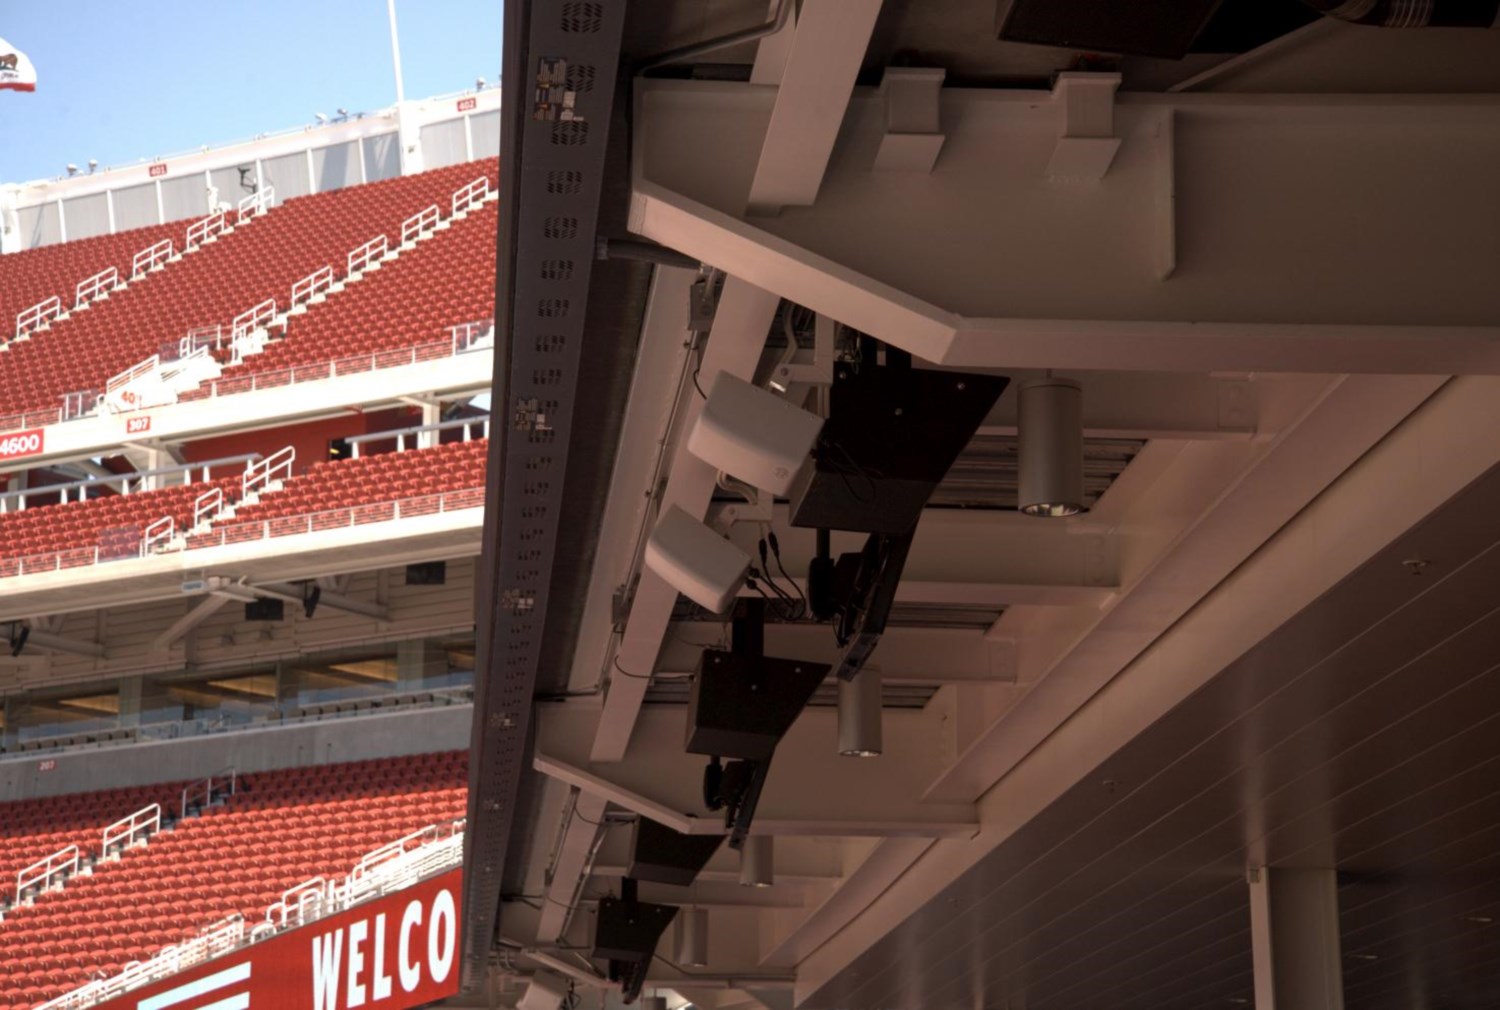 Repeaters placed throughout Levi's Stadium pass Internet service along from section to section (Ben Bajarin for TIME)